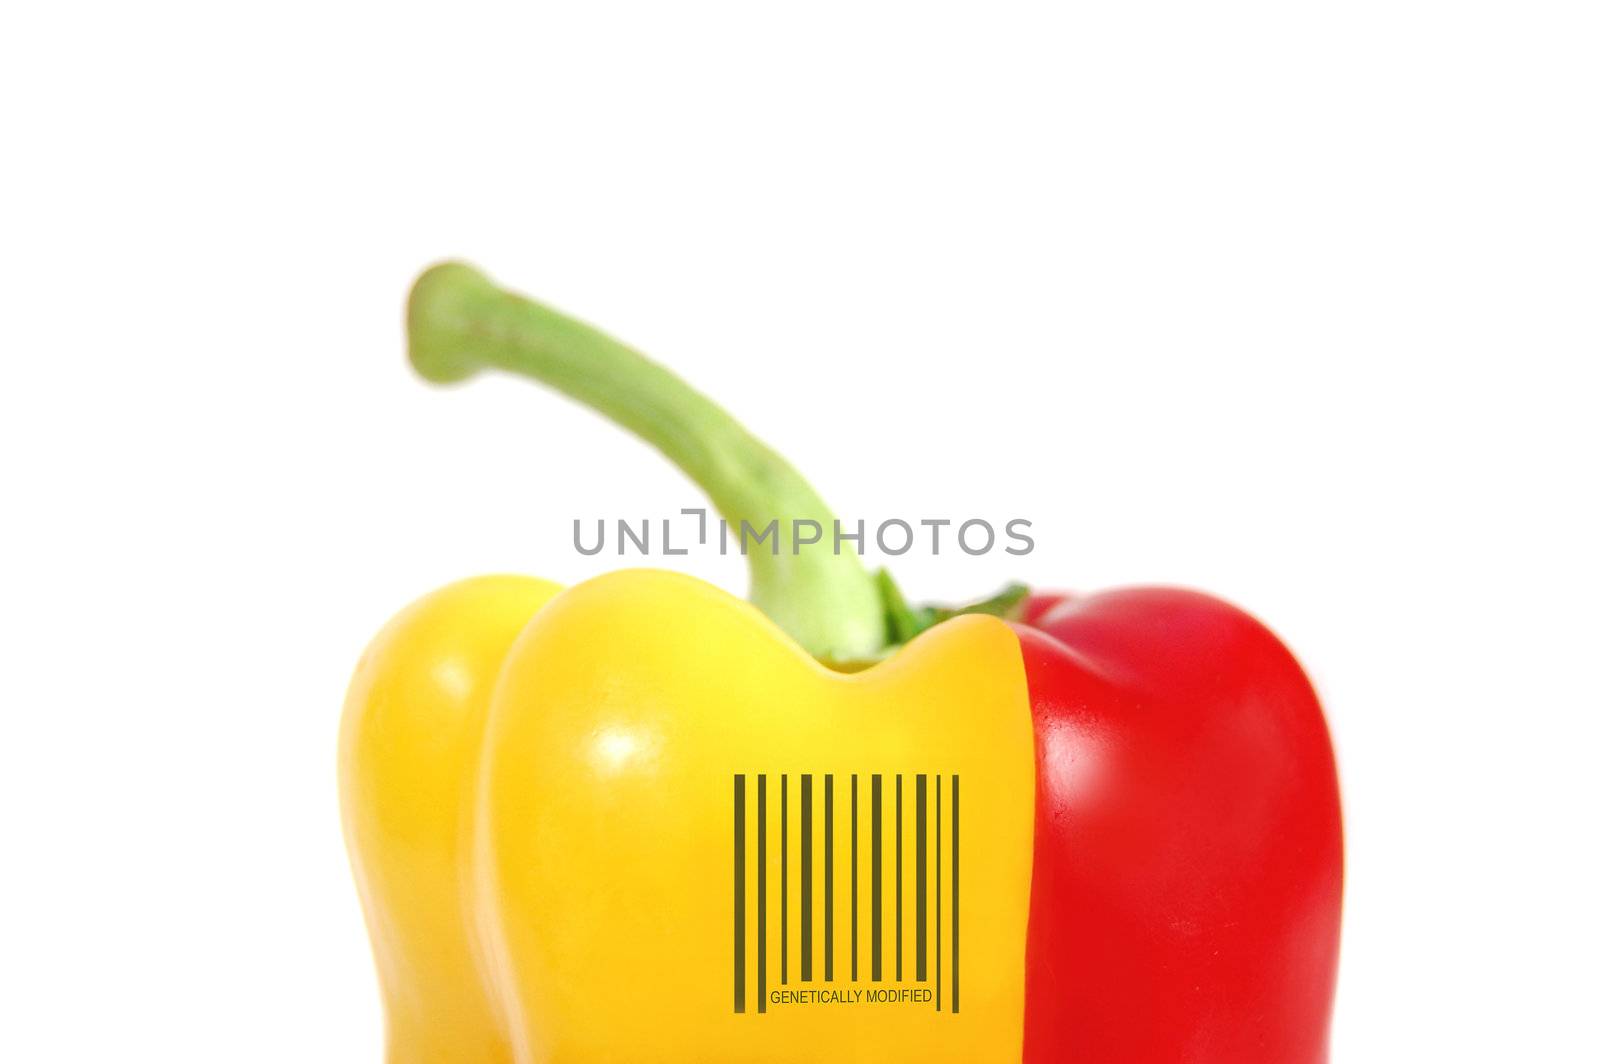 Red and yellow pepper with a bar code